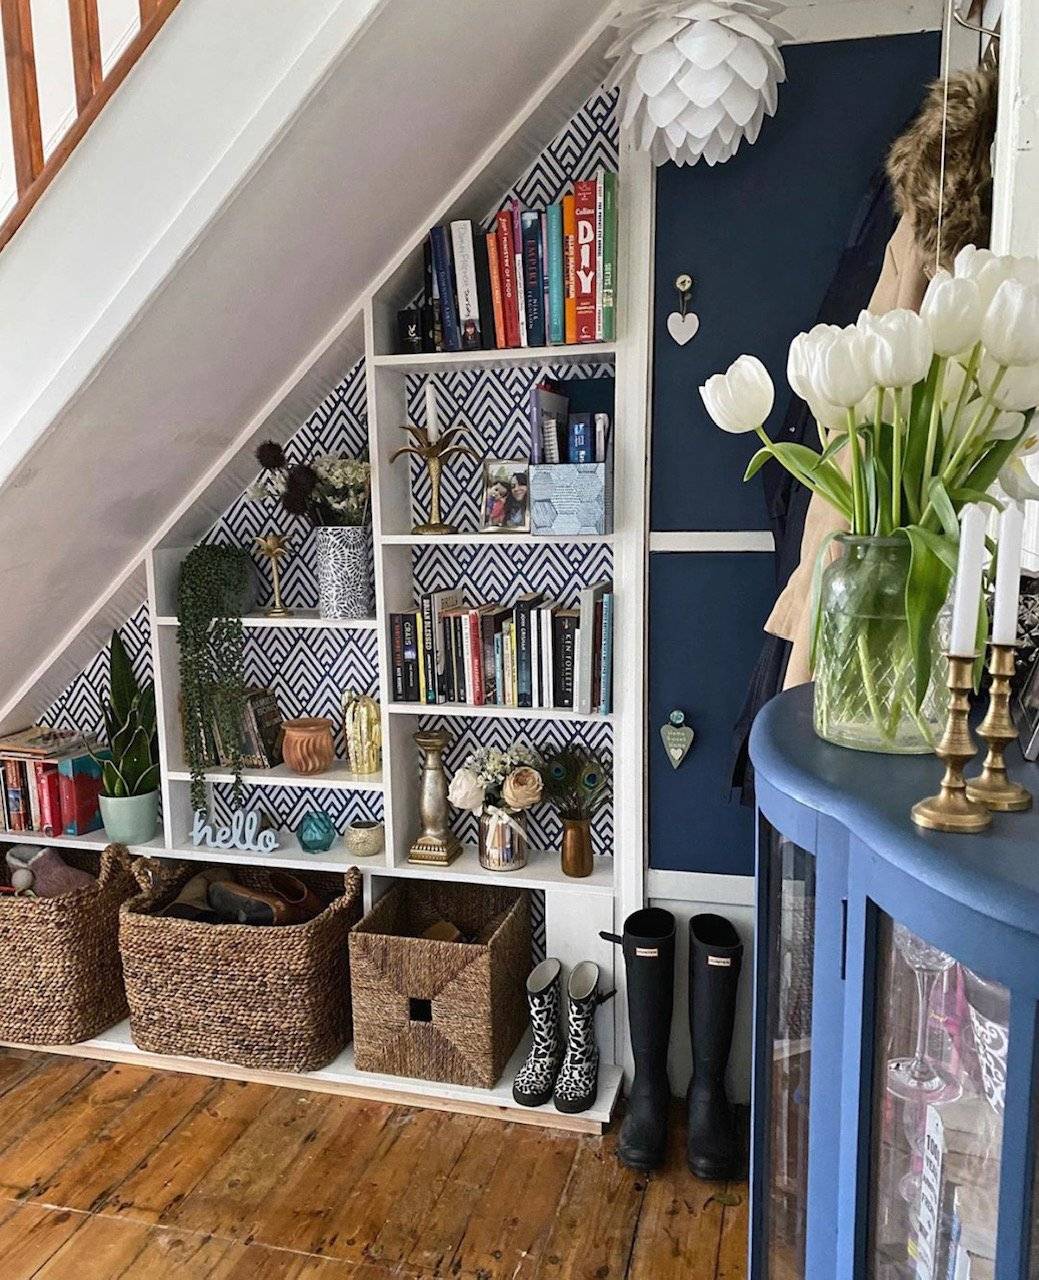 Shelving and baskets for storage (from Melanie Jade Design)